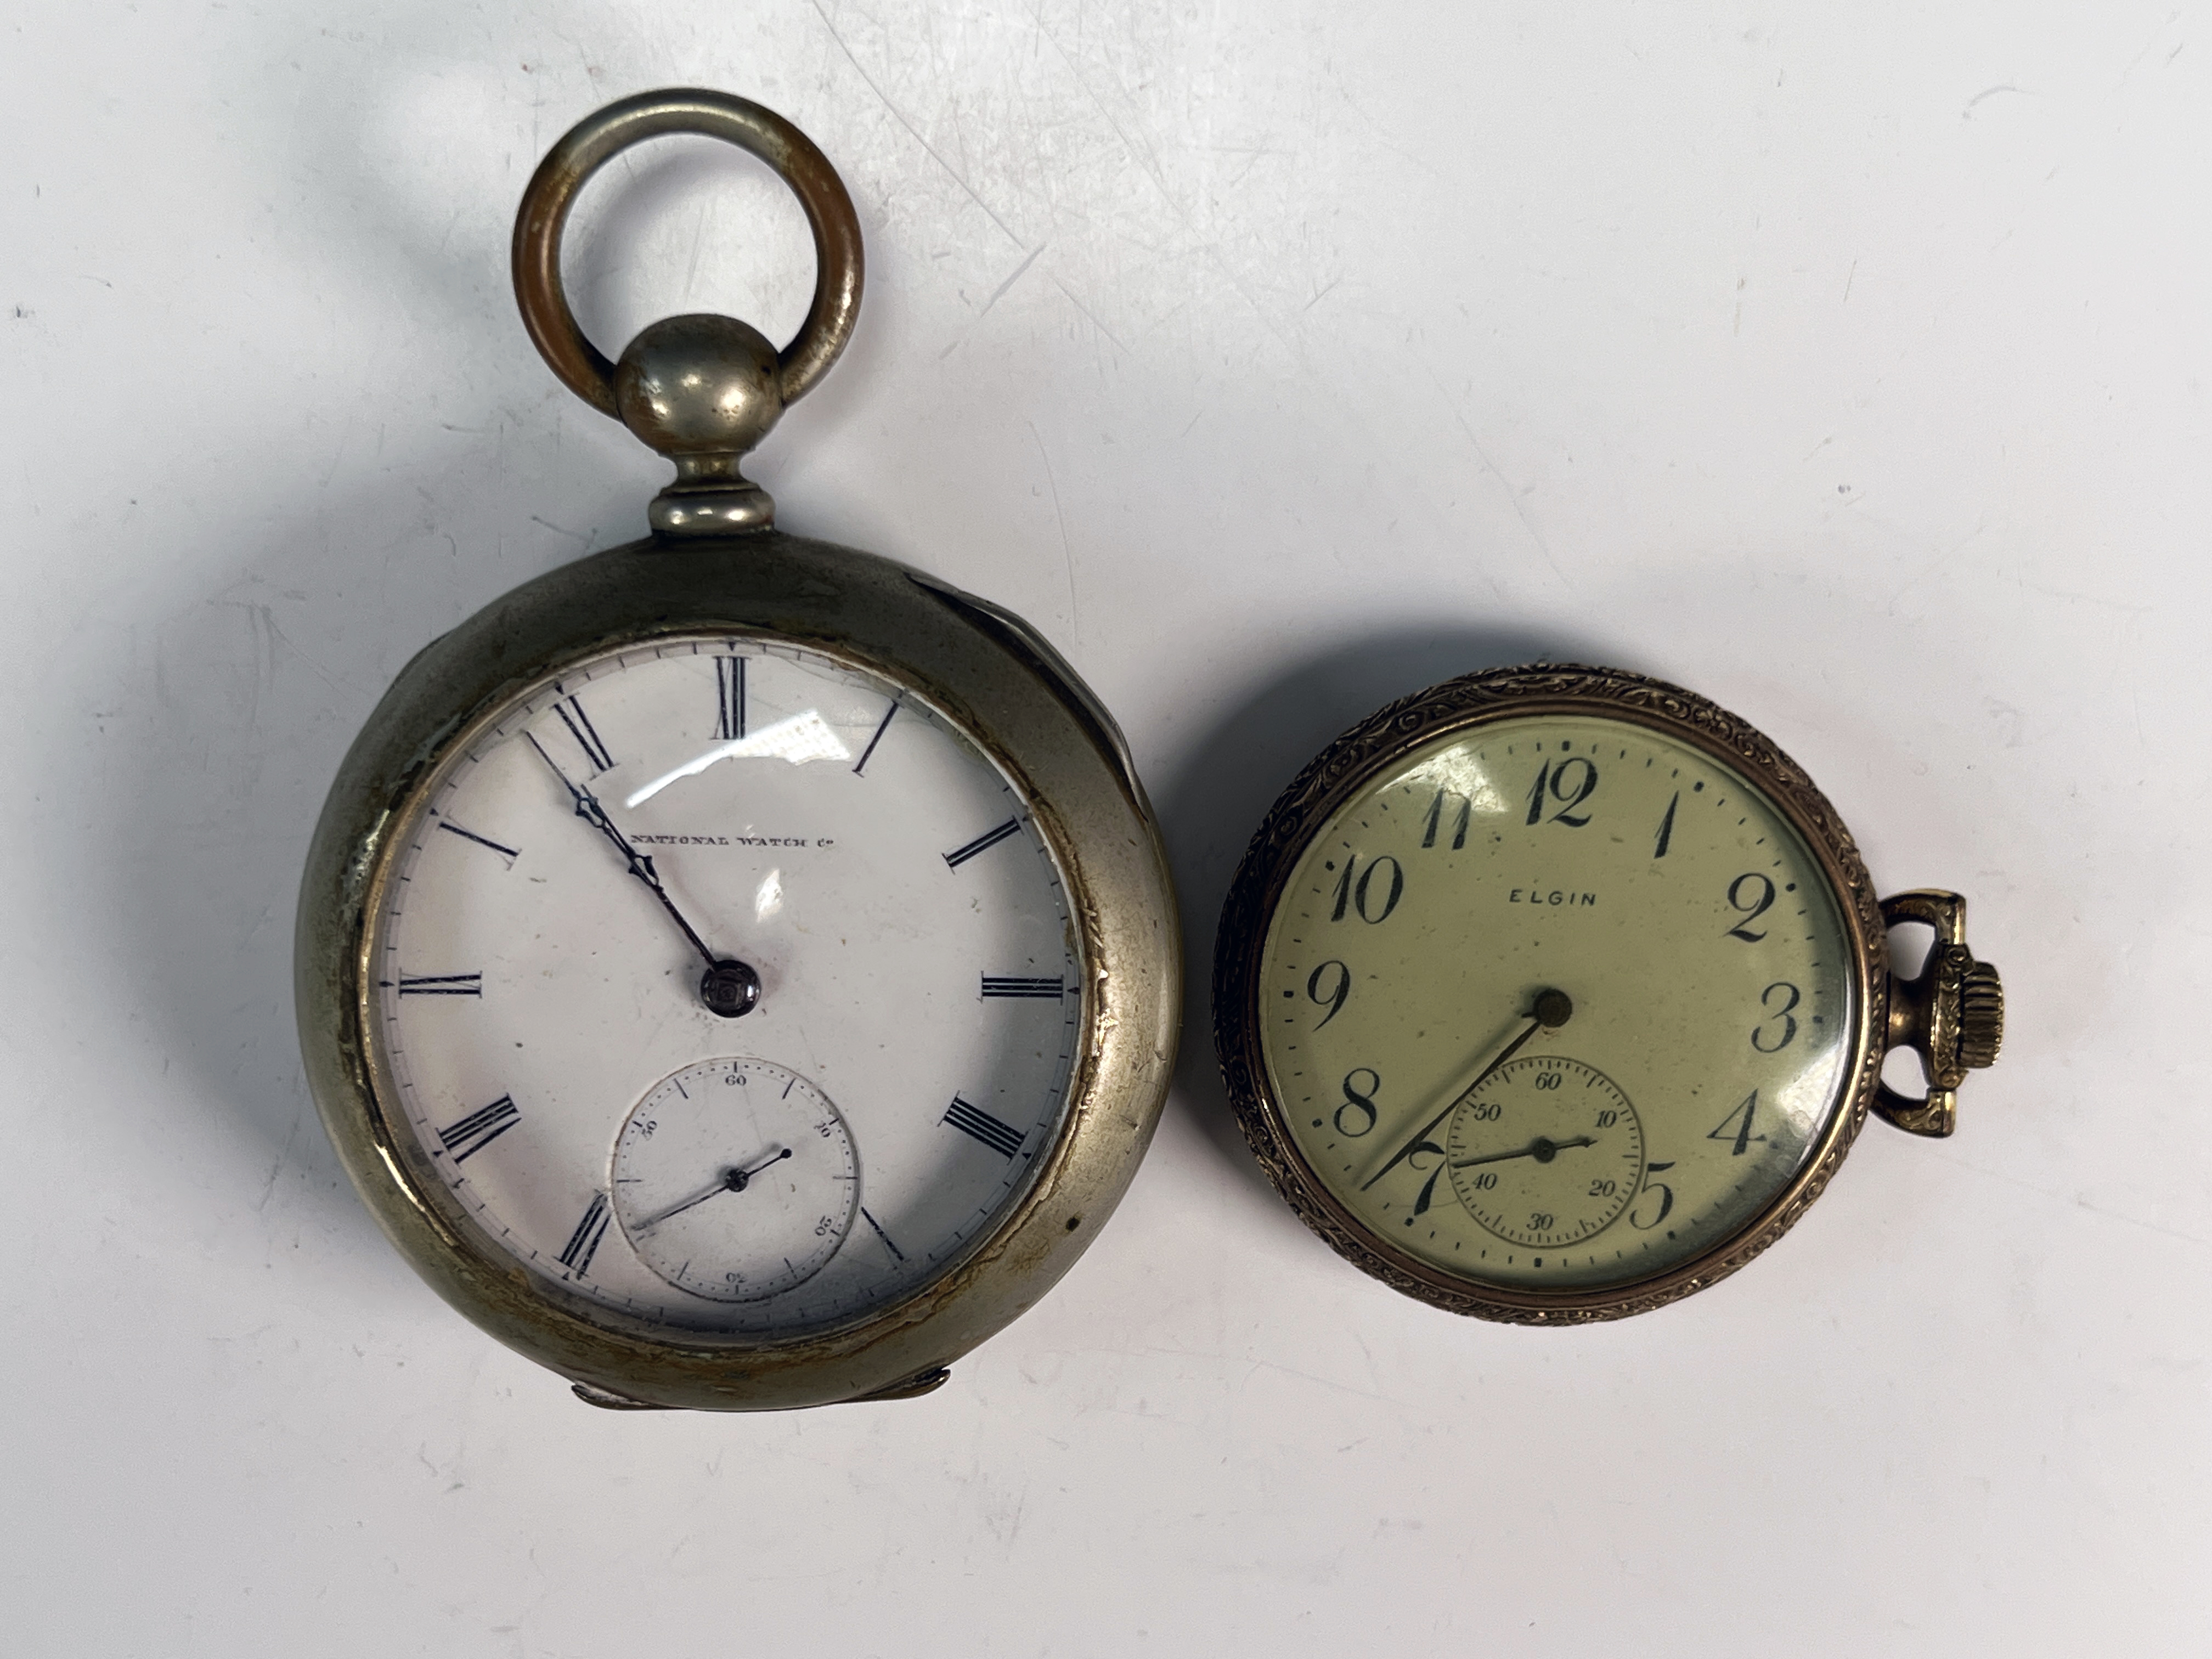 National Watch Co & Elgin Pocket Watches image 1